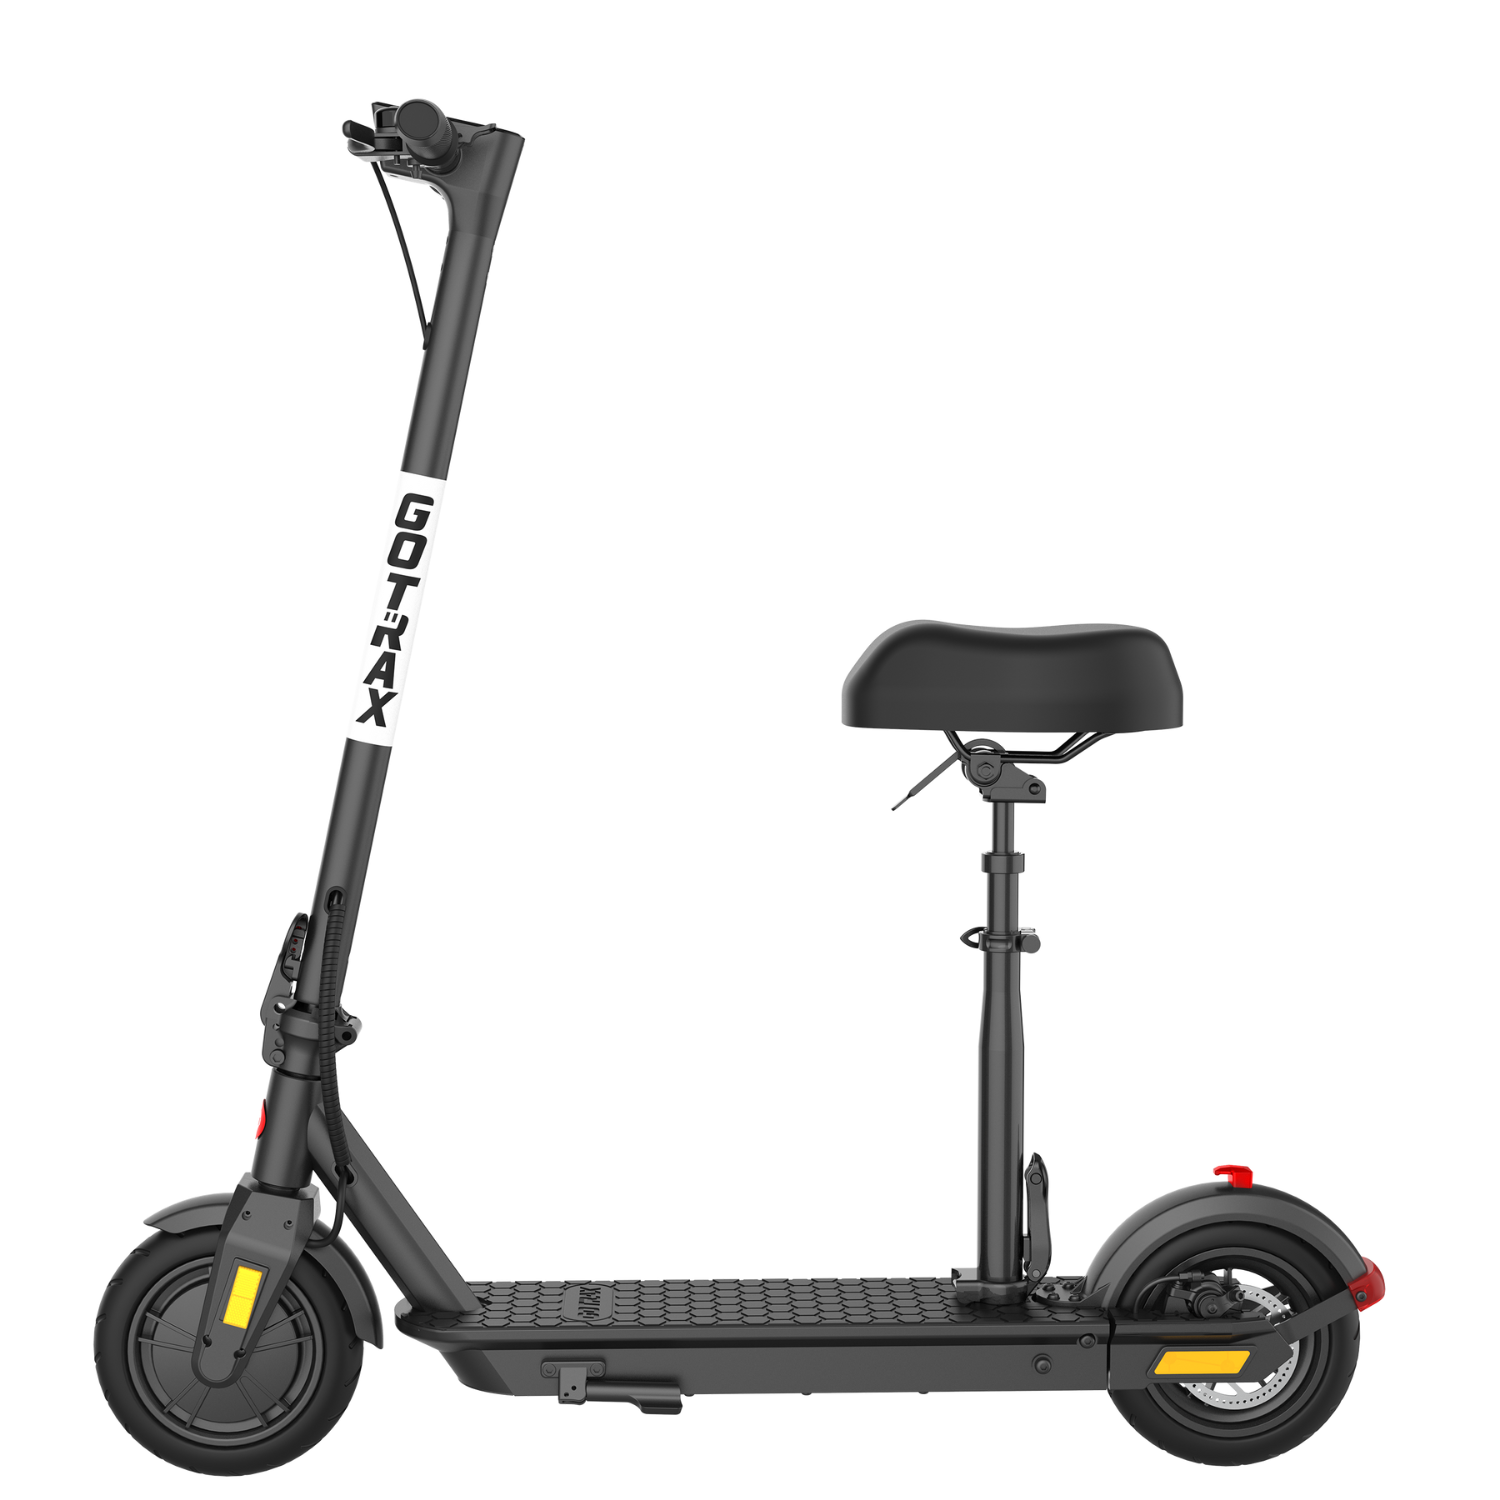 Fusion Foldable Electric Scooter with Seat 8.5'' 28KPH丨19 KM Range